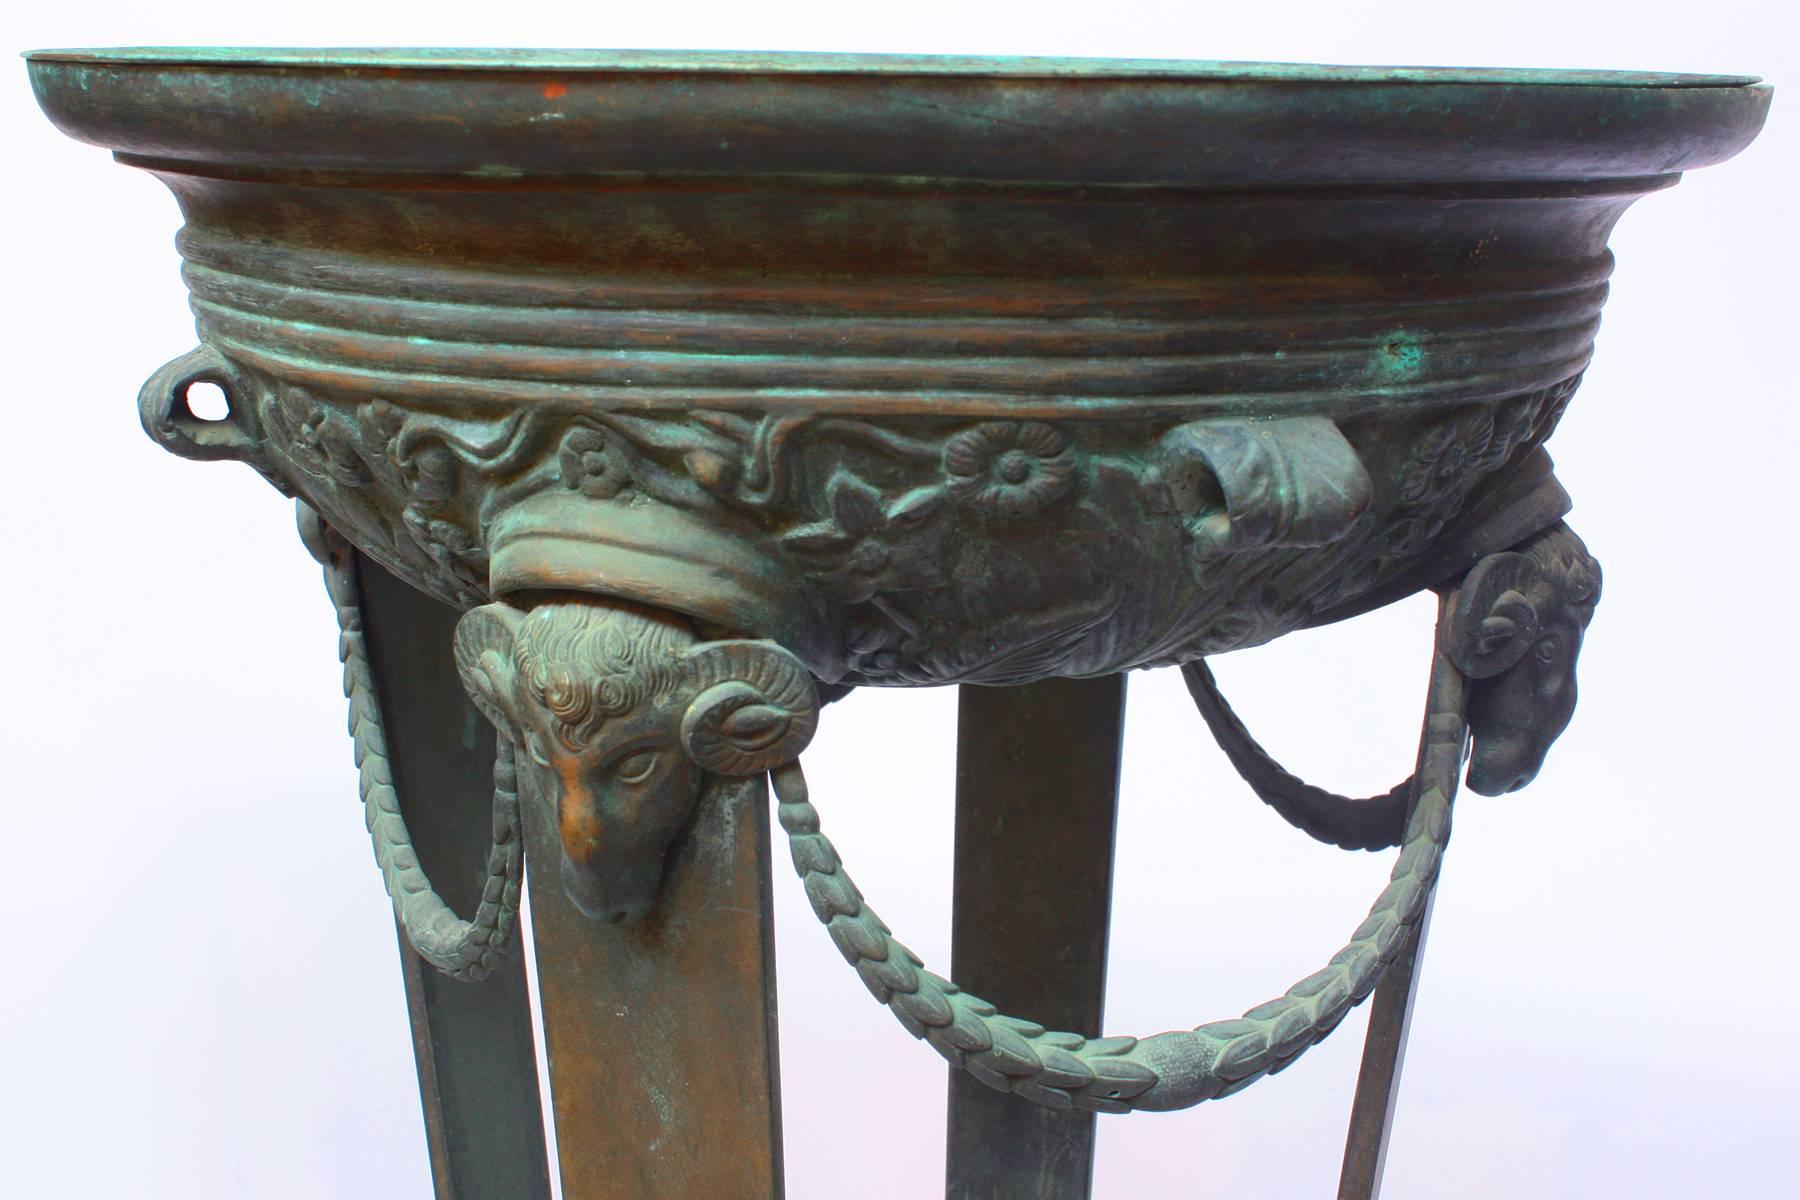 Patinated bronze neoclassical braziers / torchieres / plant stands in the Pompeian style, with a circular shallow basin (15.75